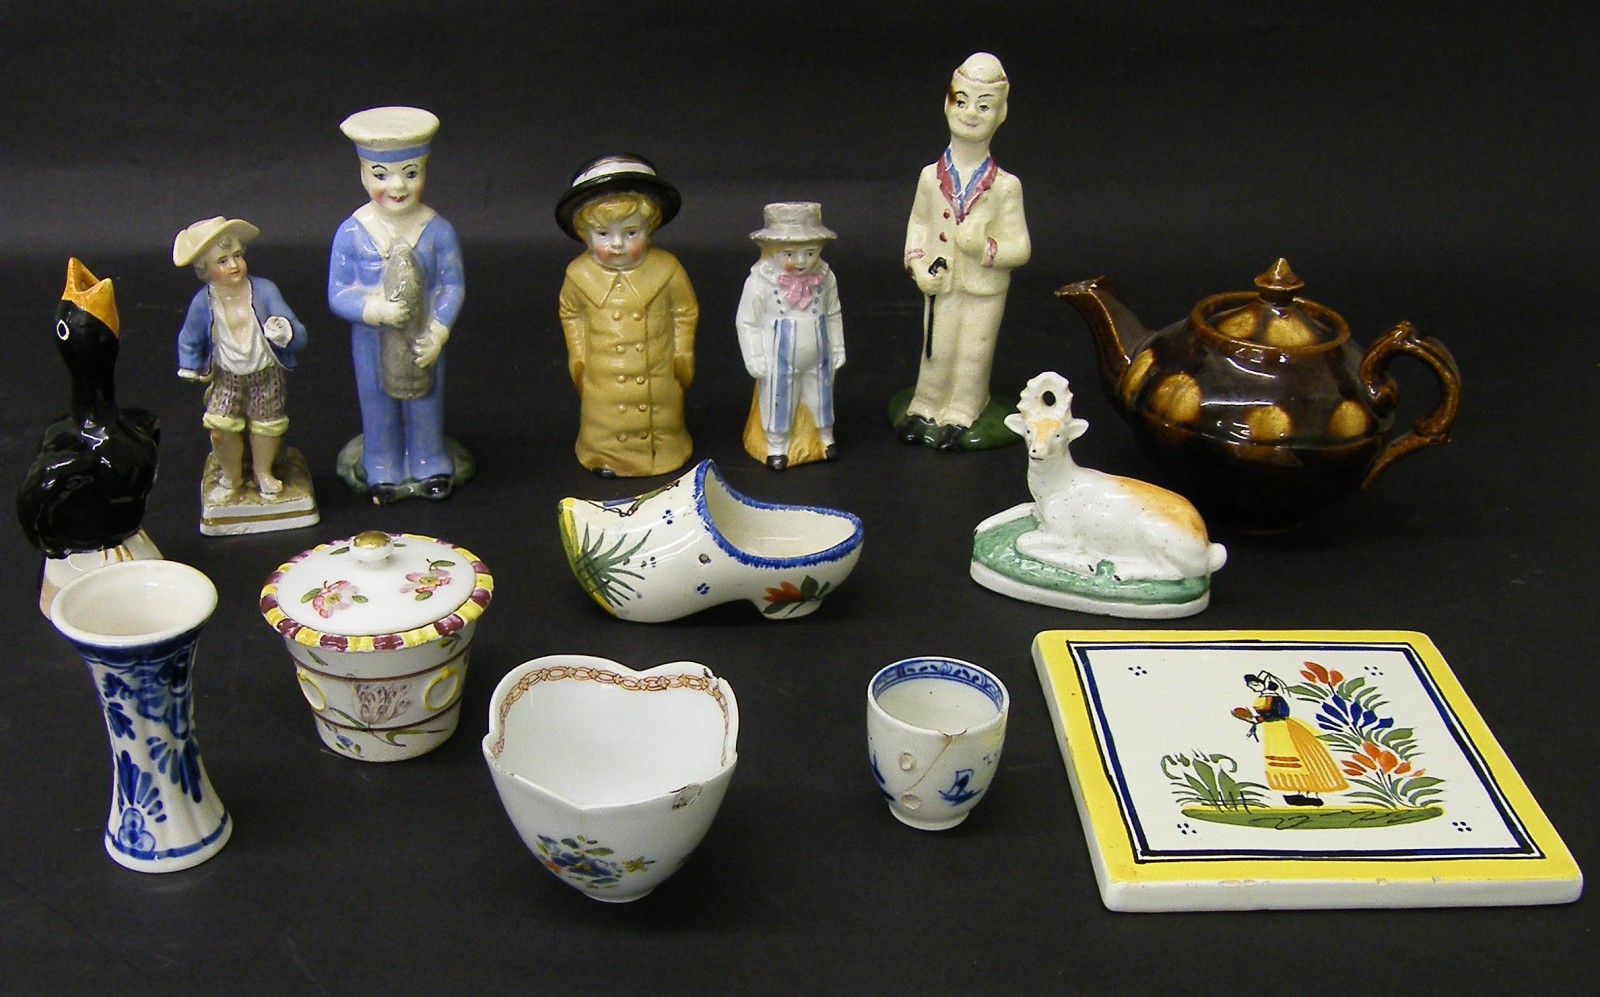 Collection of decorative ceramics to include character figurines, Delft tile and clock etc